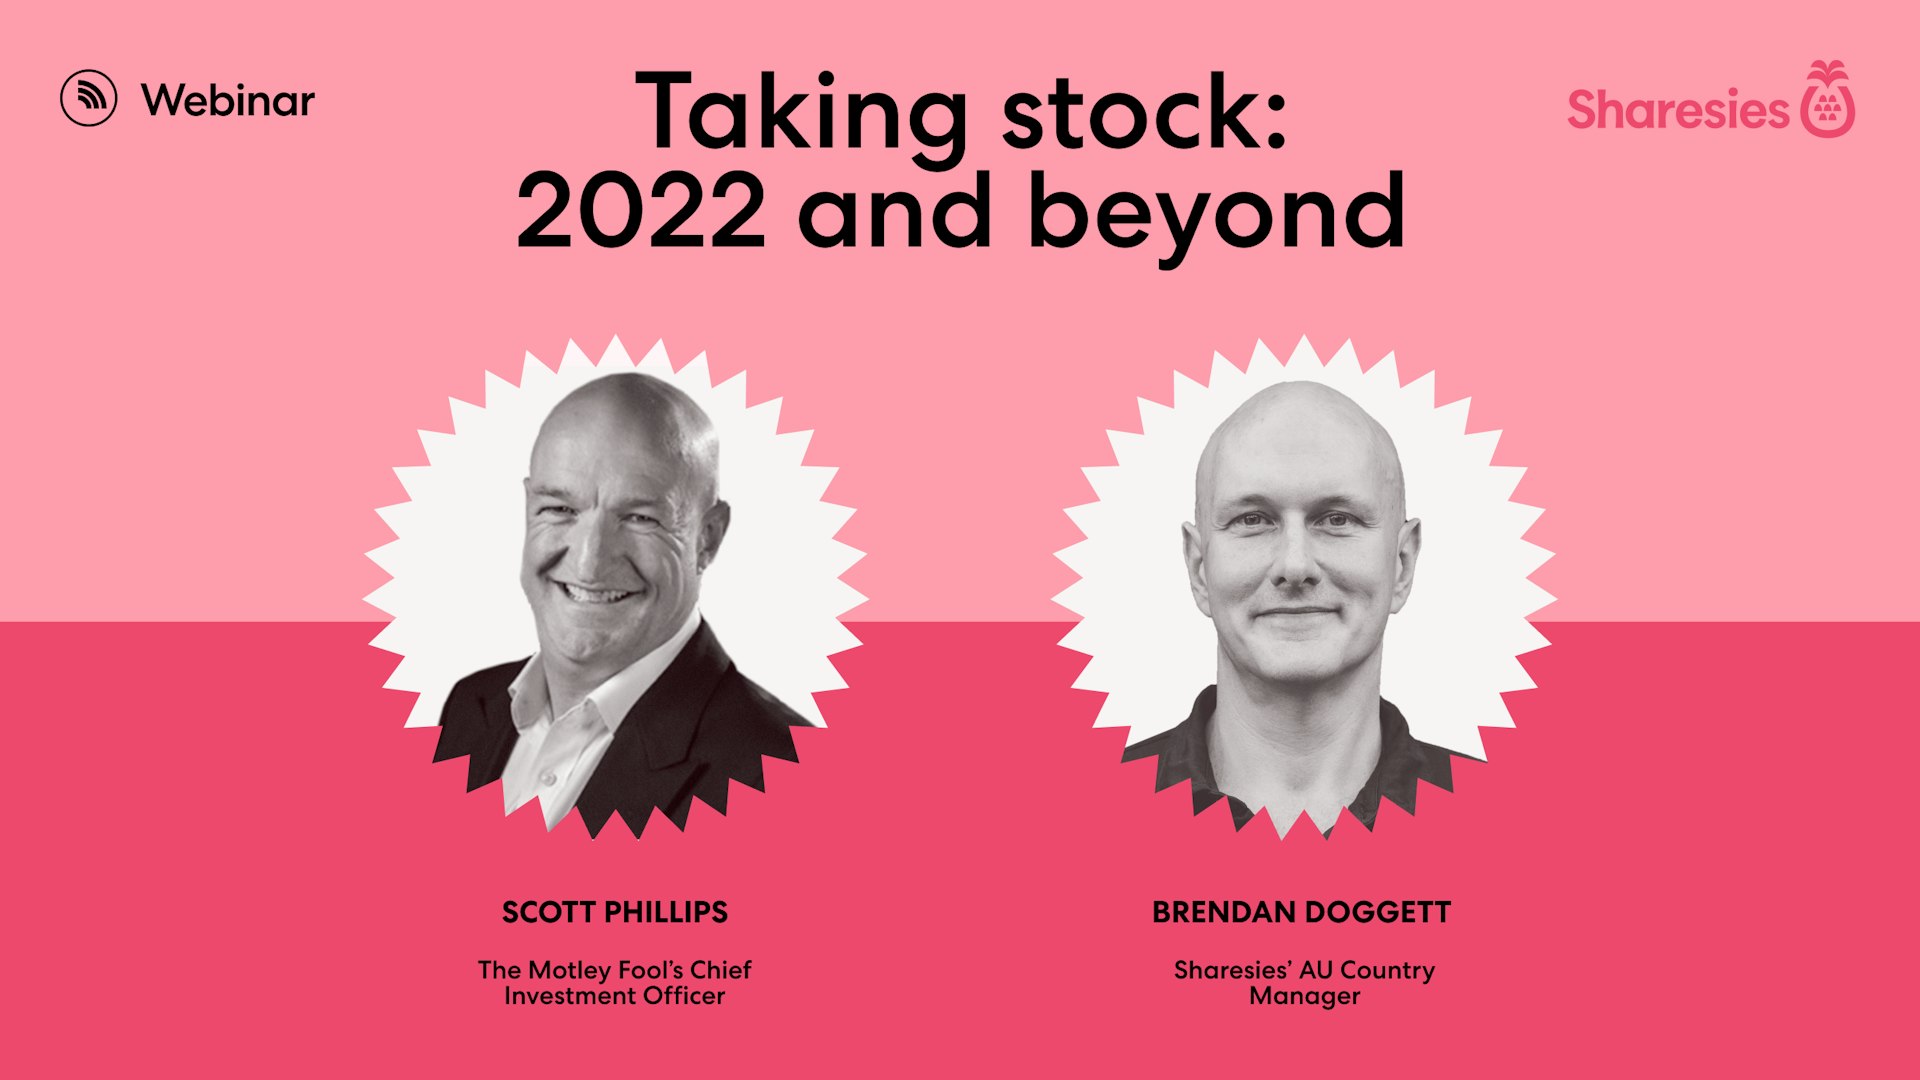 The webinar header, featuring photos of Scott Phillips from the Motley Fool and Brendan from Sharesies against a pink background.